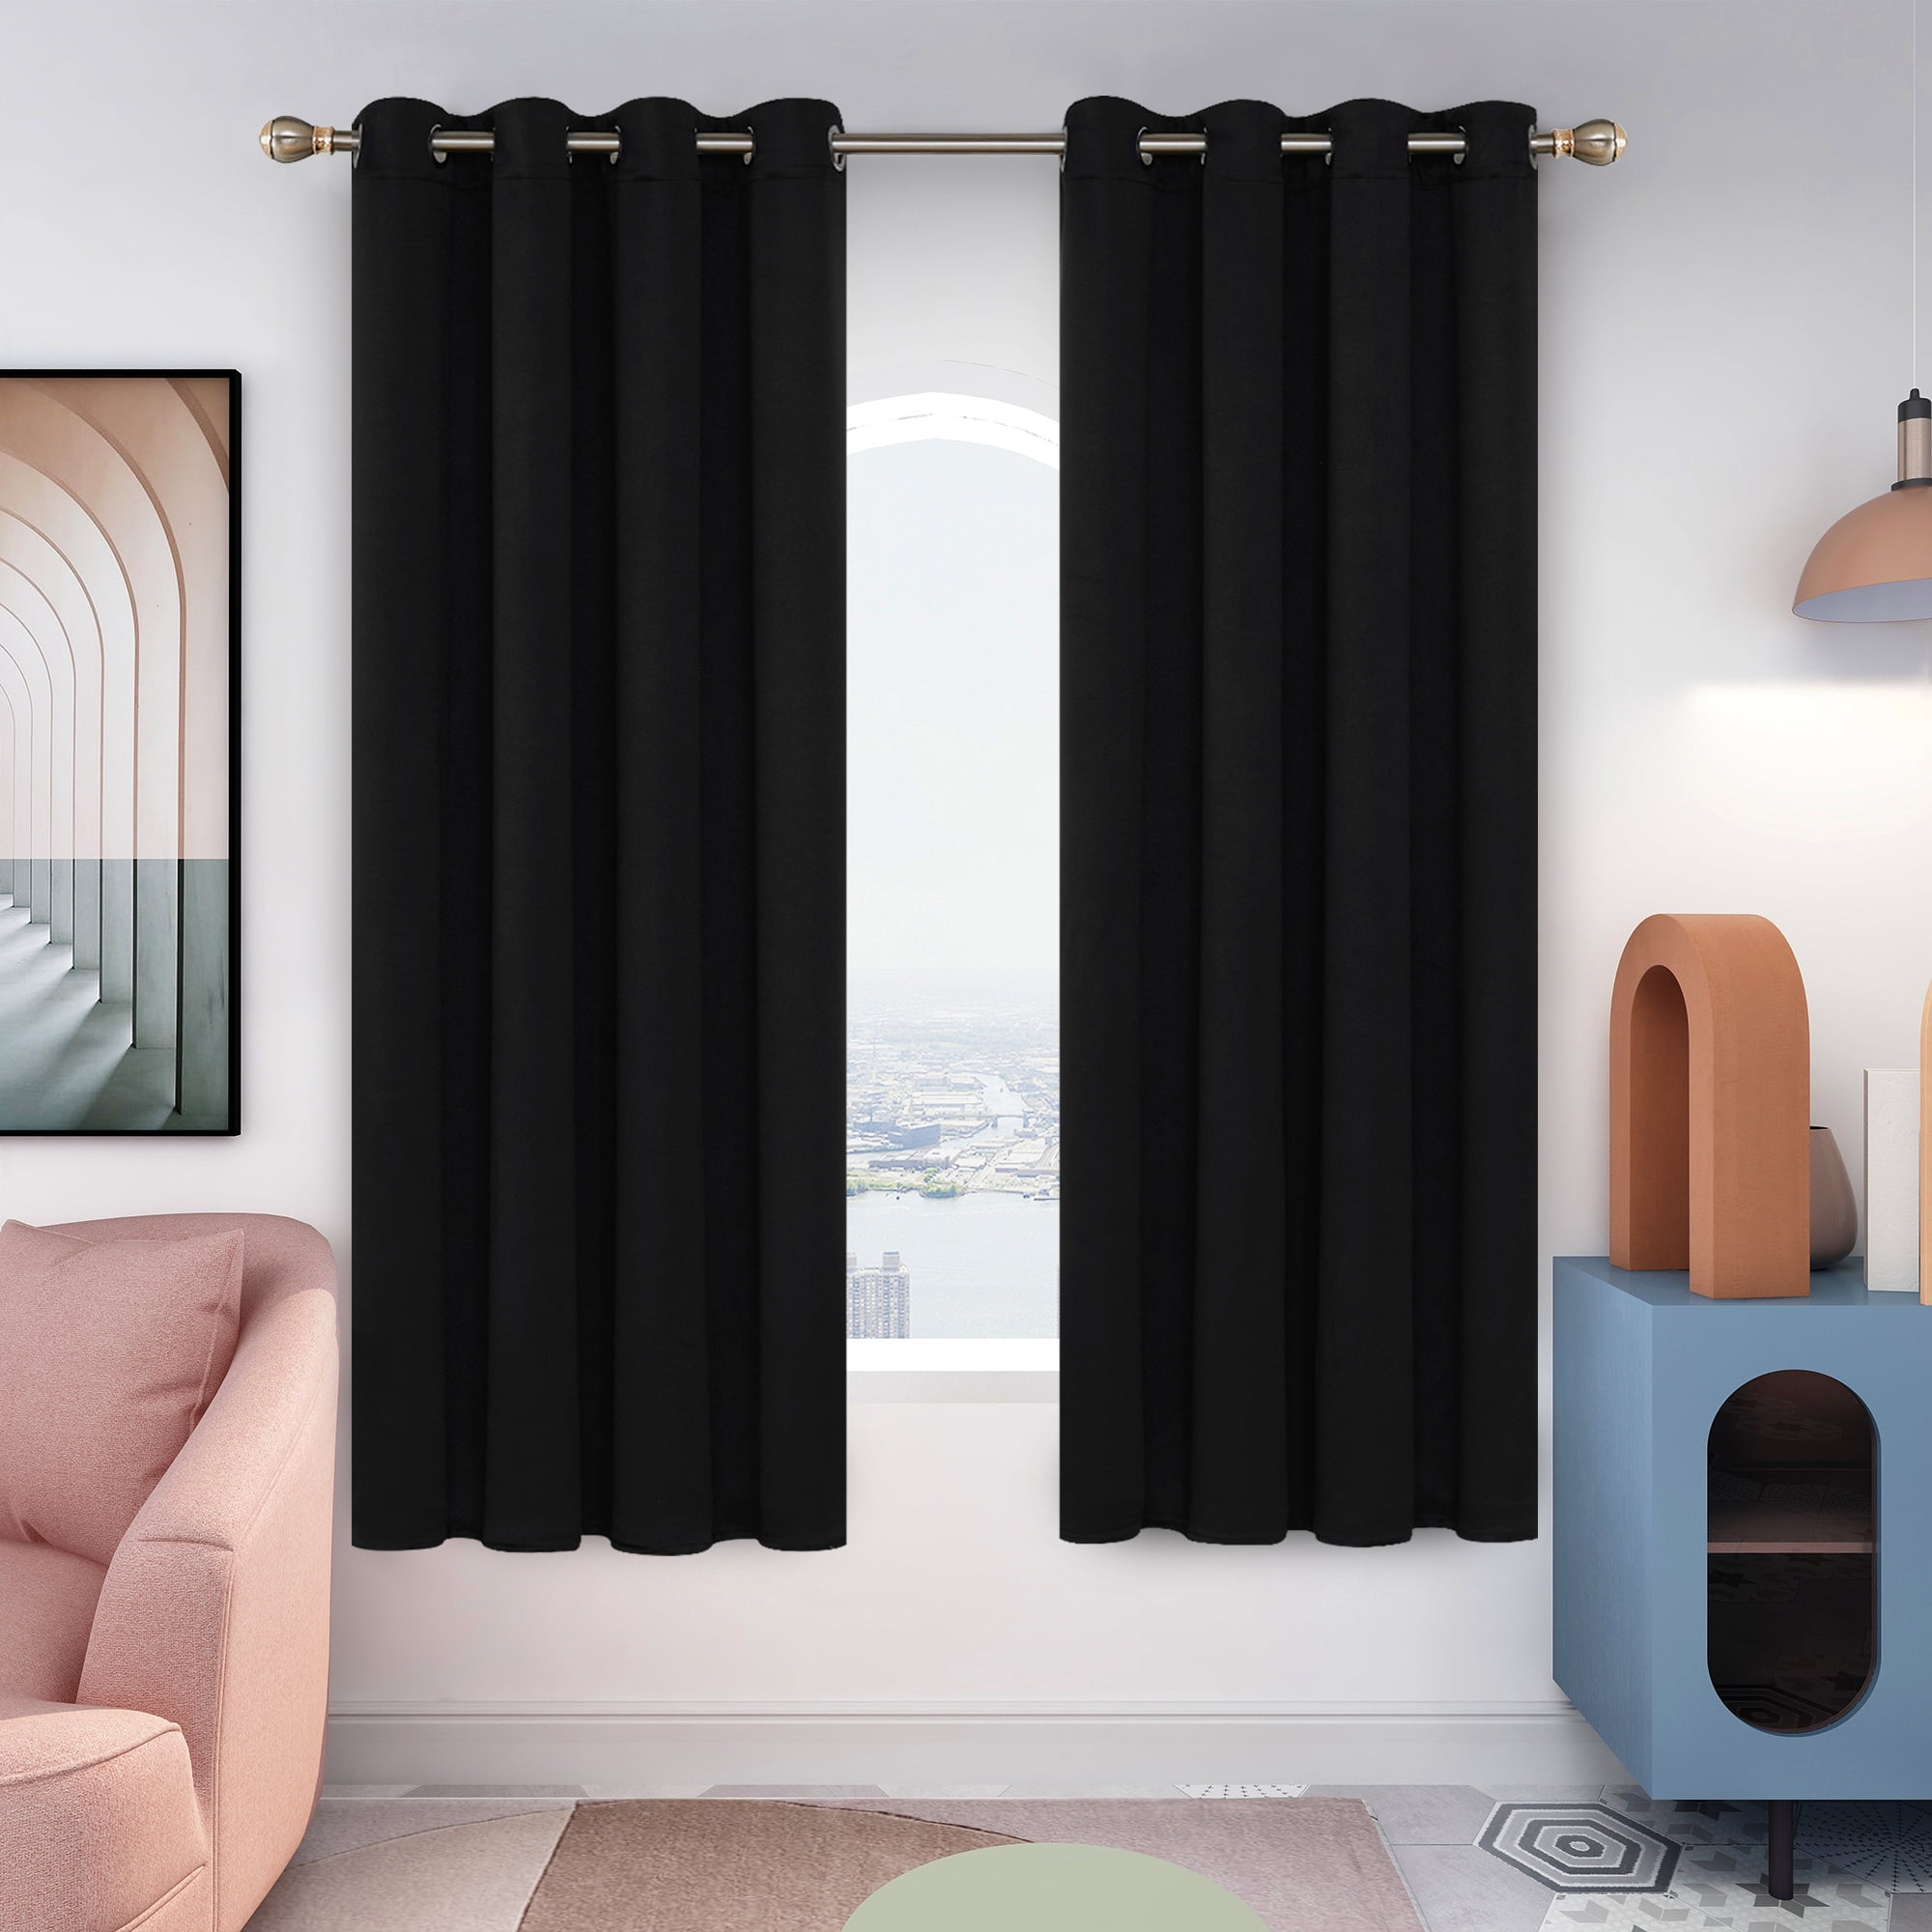 Dark Grey Deconovo Blackout Curtains Foil Print Wave Pattern Grommet Bedroom Curtains 52x72 Inch Room Darkening Thermal Insulated Drapes 2 Panels 